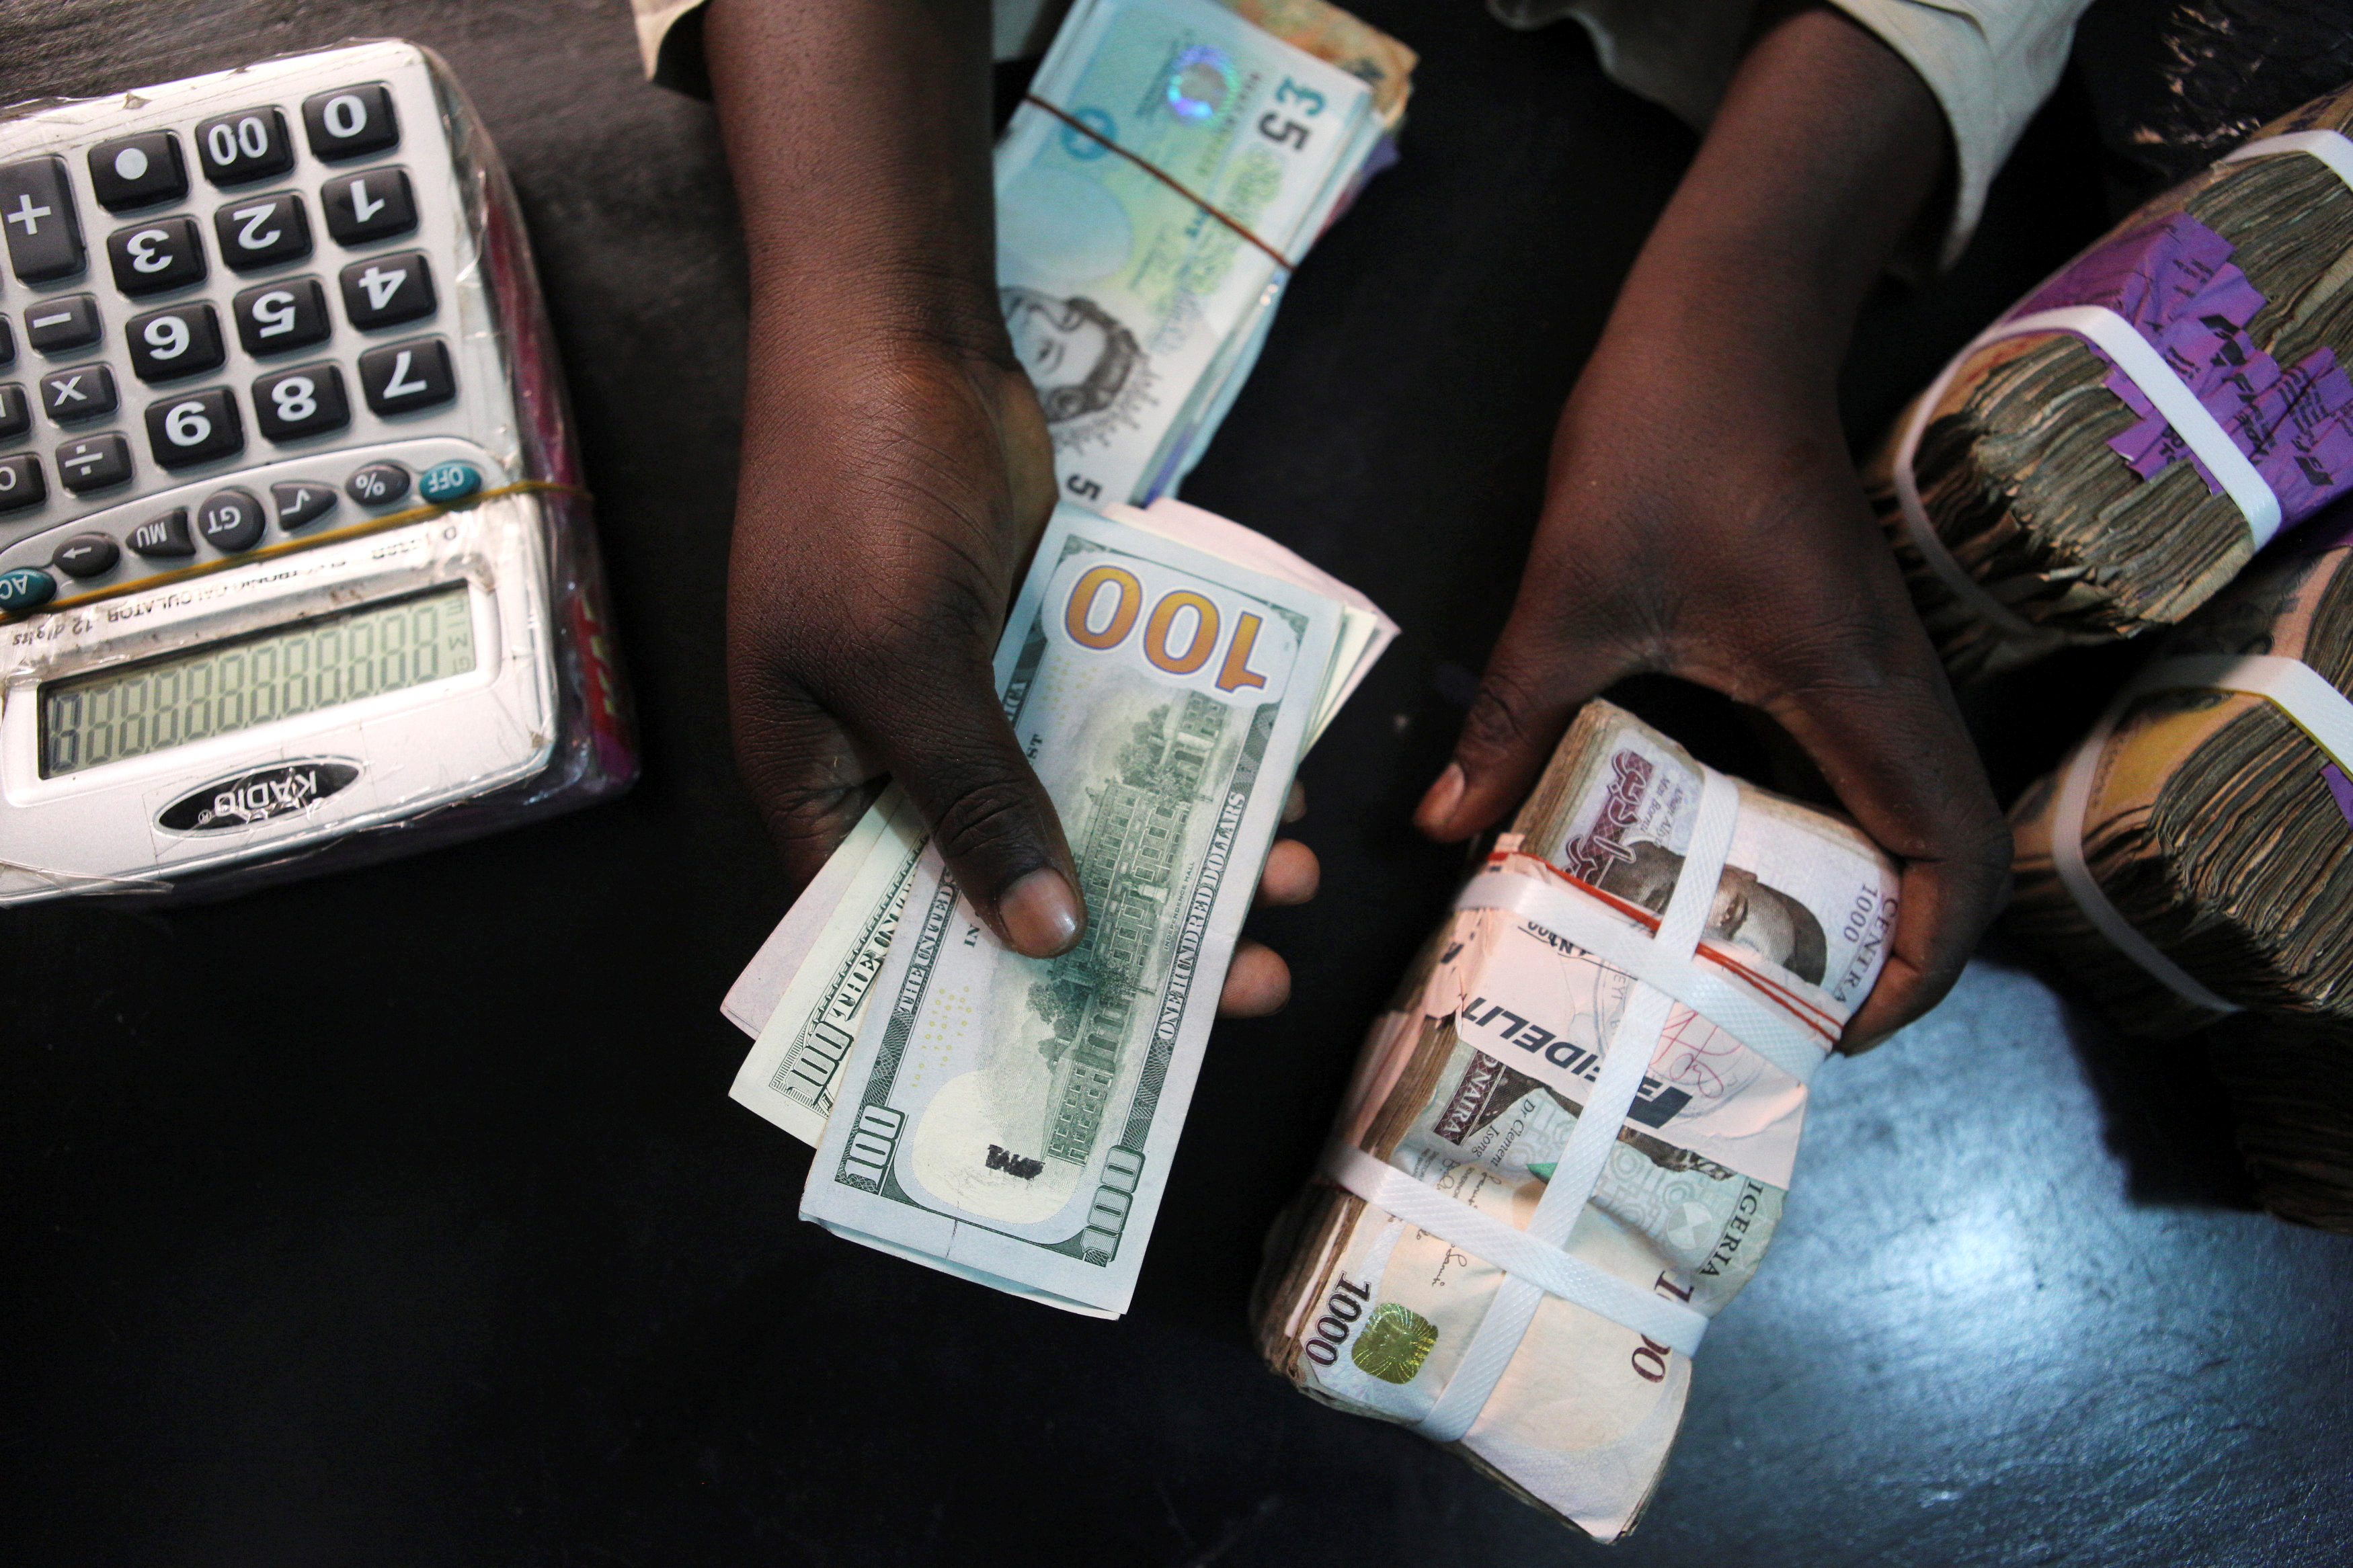 A trader changes dollars for naira at a currency exchange store in Lagos, Nigeria, February 12, 2015. REUTERS/Joe Penney/File Photo